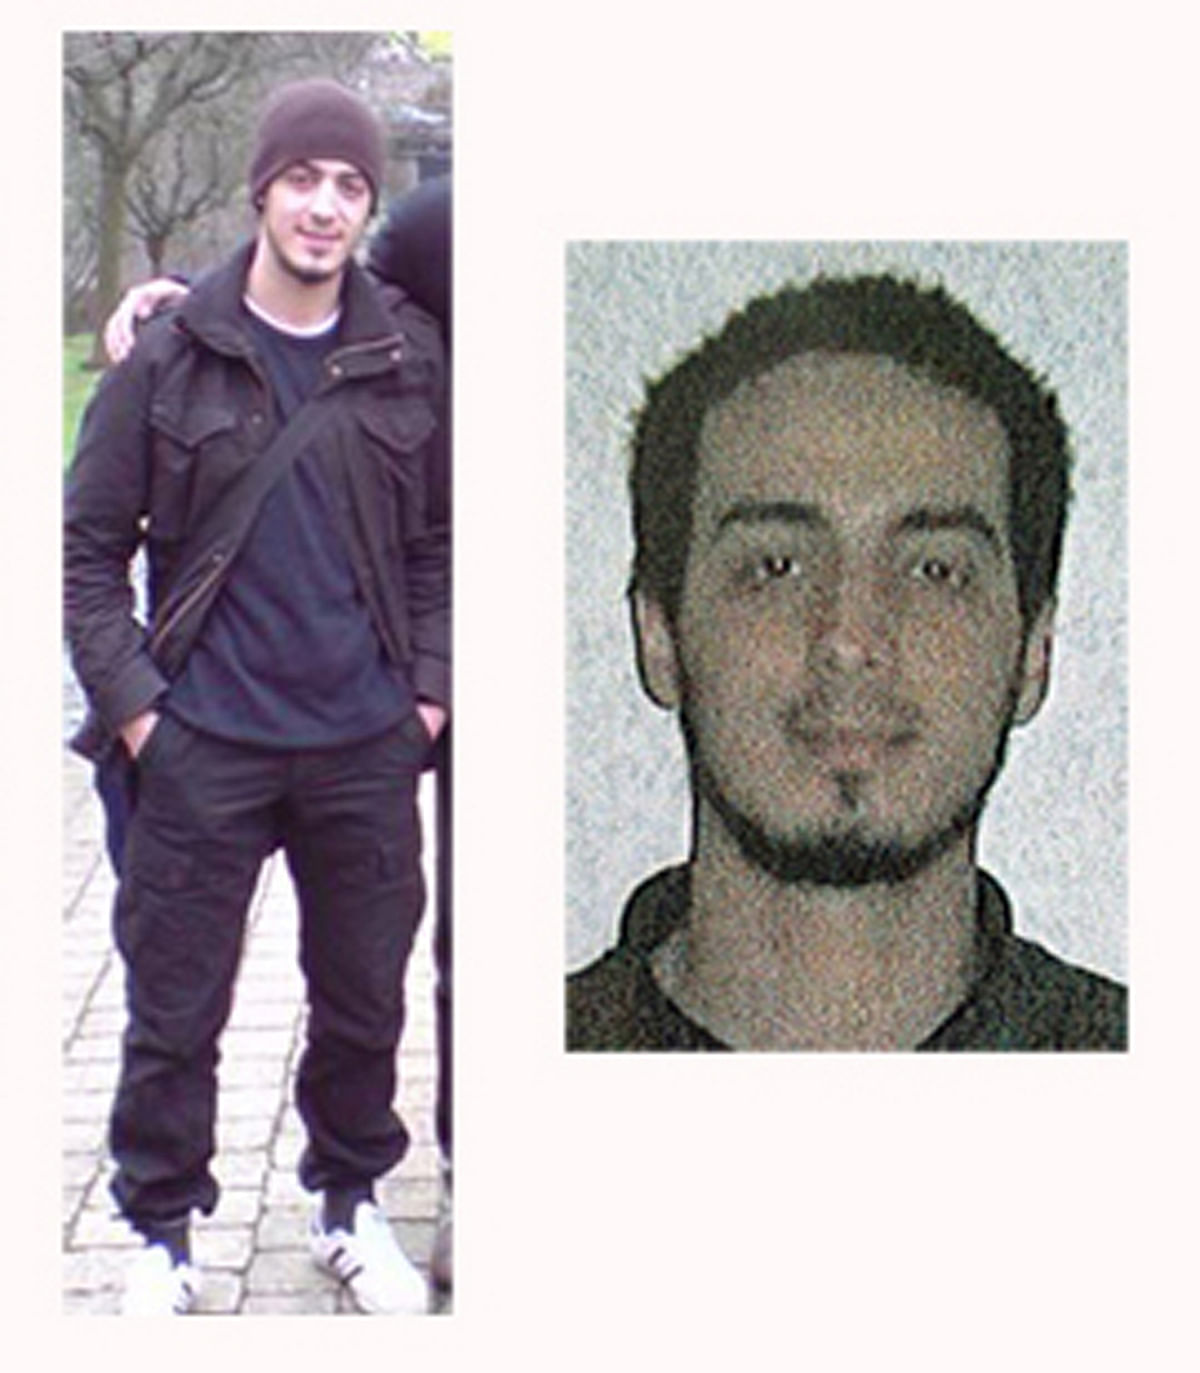 Brussels suicide bomber Najim Laachraoui gave no signs of being radicalised but broke all contact with his family.